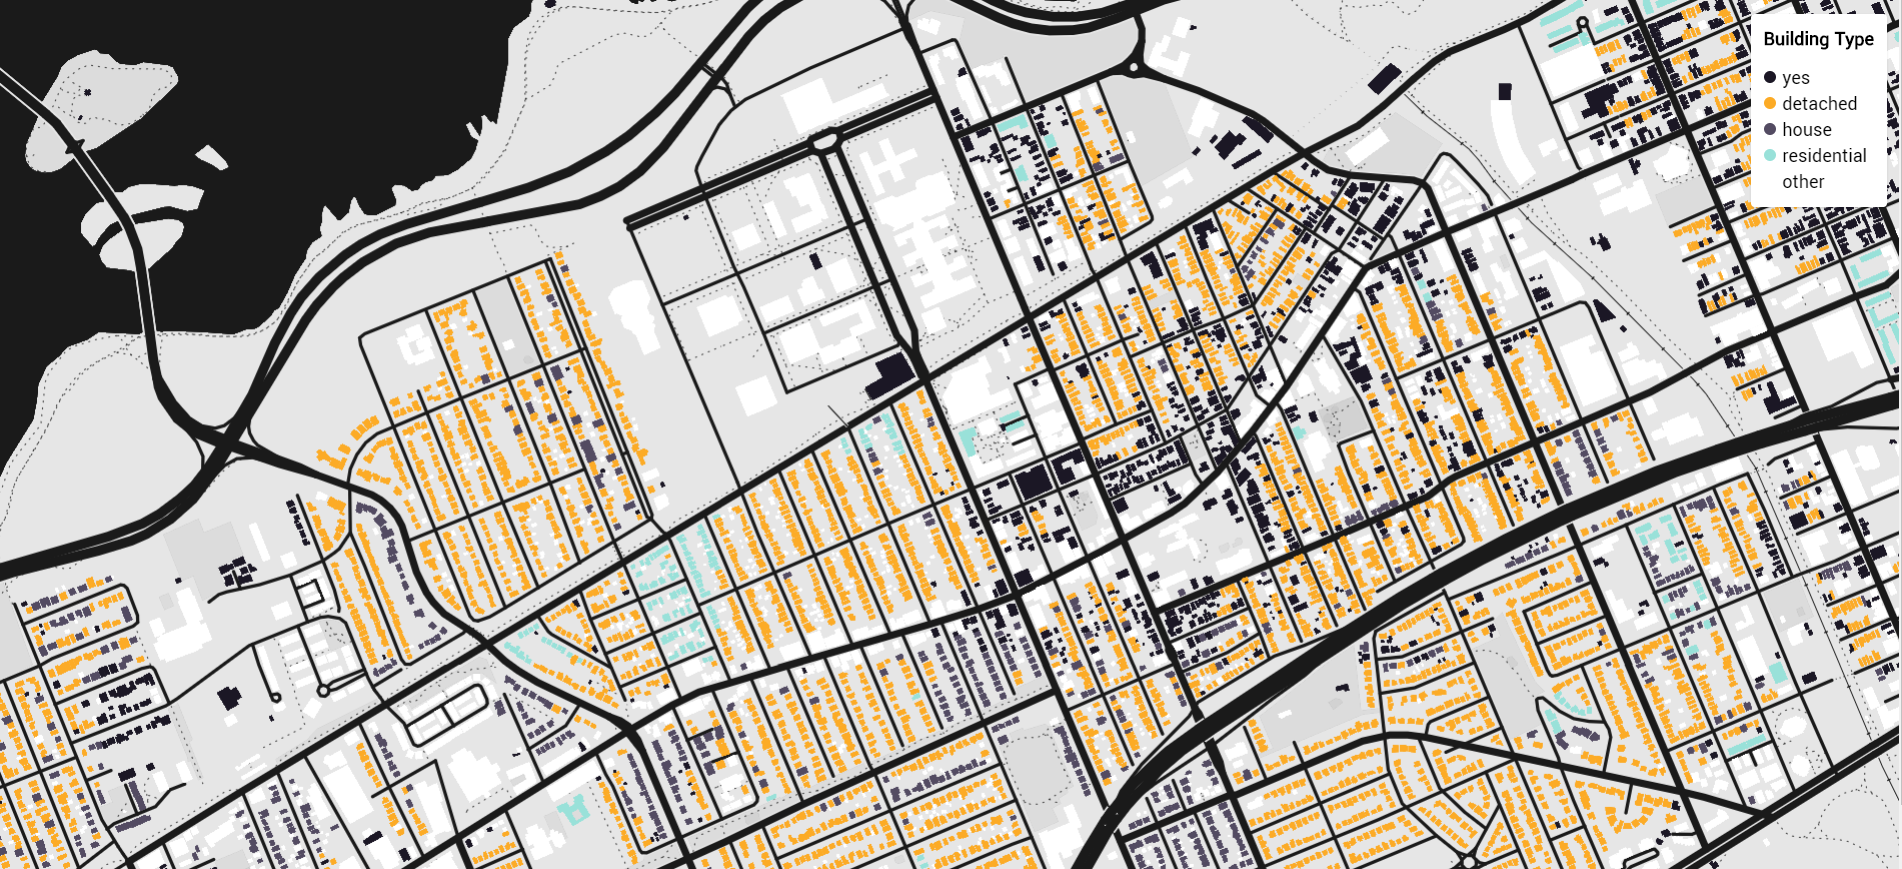 Image of the building footprints in Ottawa, Canada, collected from OpenStreetMap